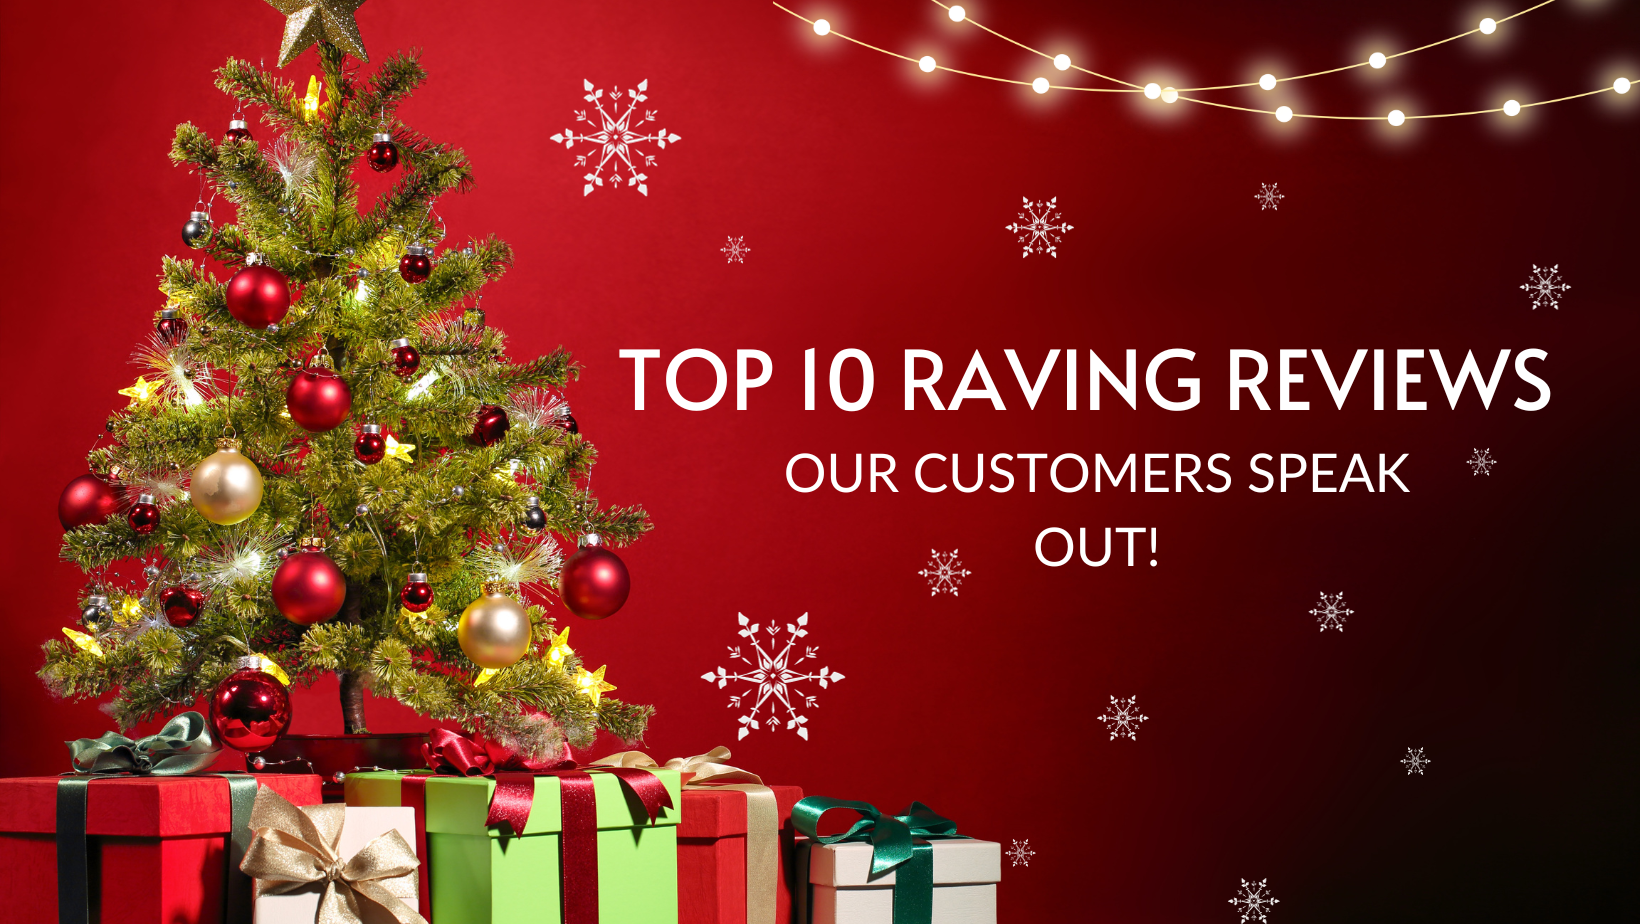 Top 10 Raving Reviews: Our Customers Speak Out! - December 3rd